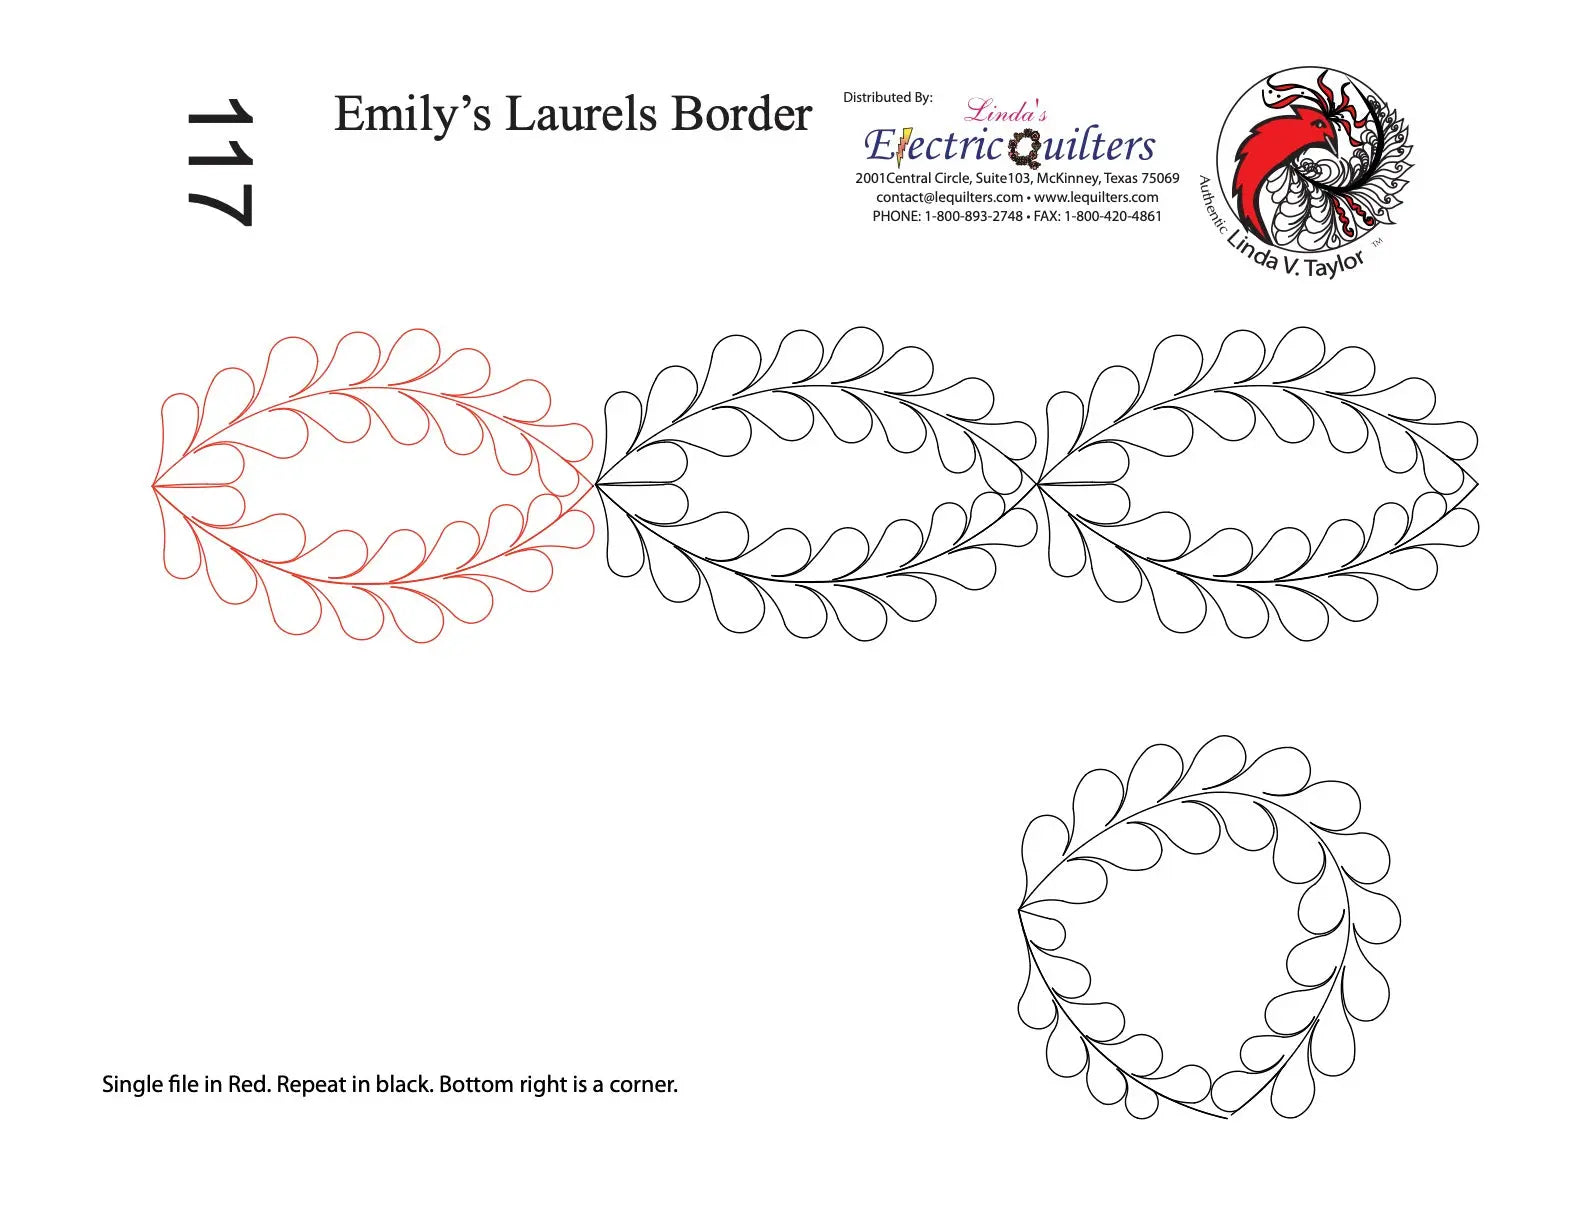 117 Emily's Laurels Pantograph with Blocks by Linda V. Taylor - Linda's Electric Quilters